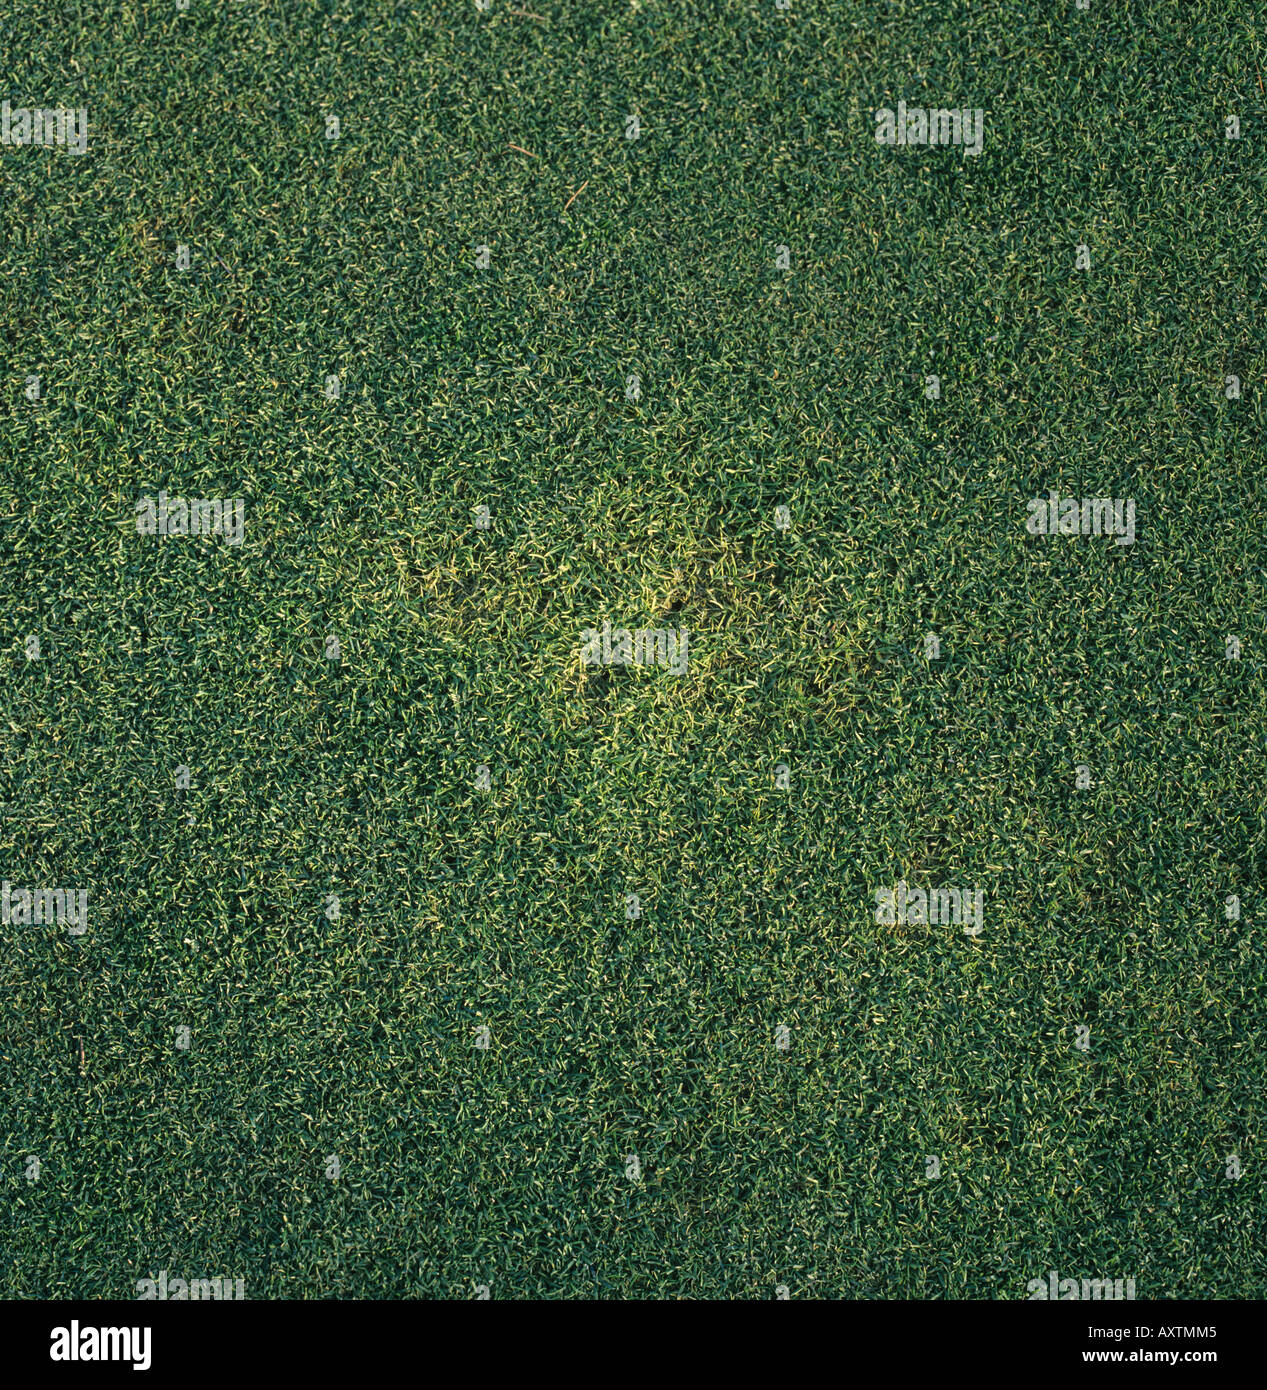 Yellow patch (Rhizoctonia cerealis) patch on golf putting green grass Stock Photo